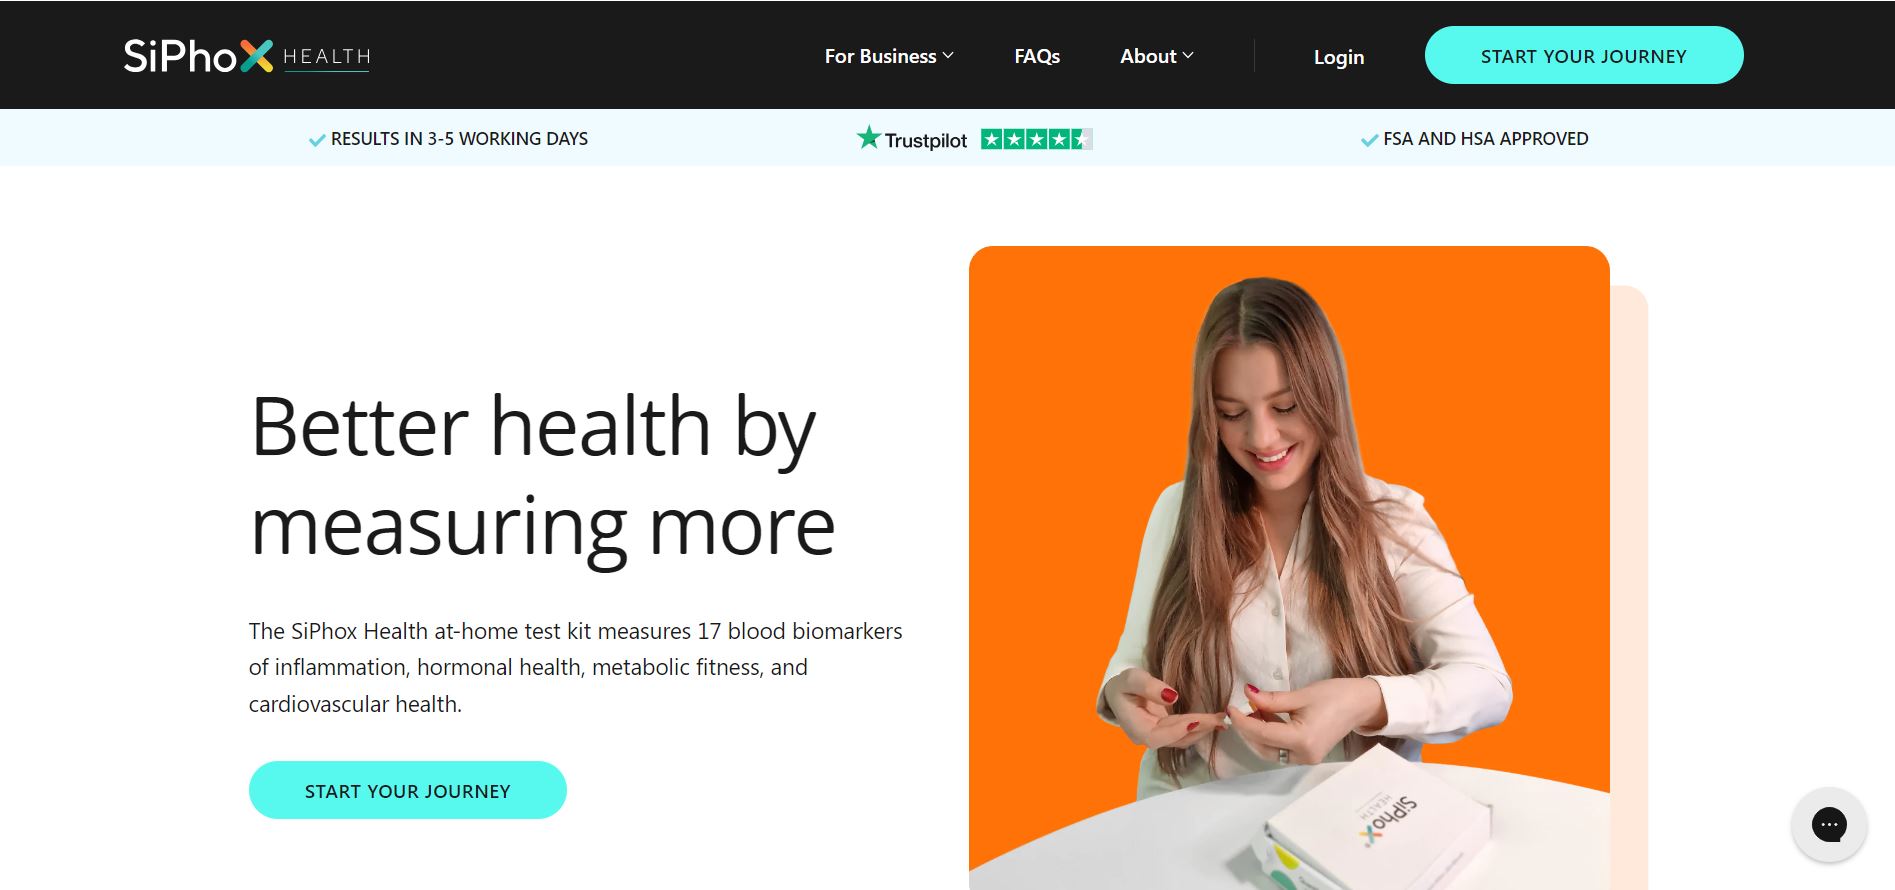 SiPhox Health: Cambridge-based startup revolutionizing personalized health diagnostics, funded with $27M seed